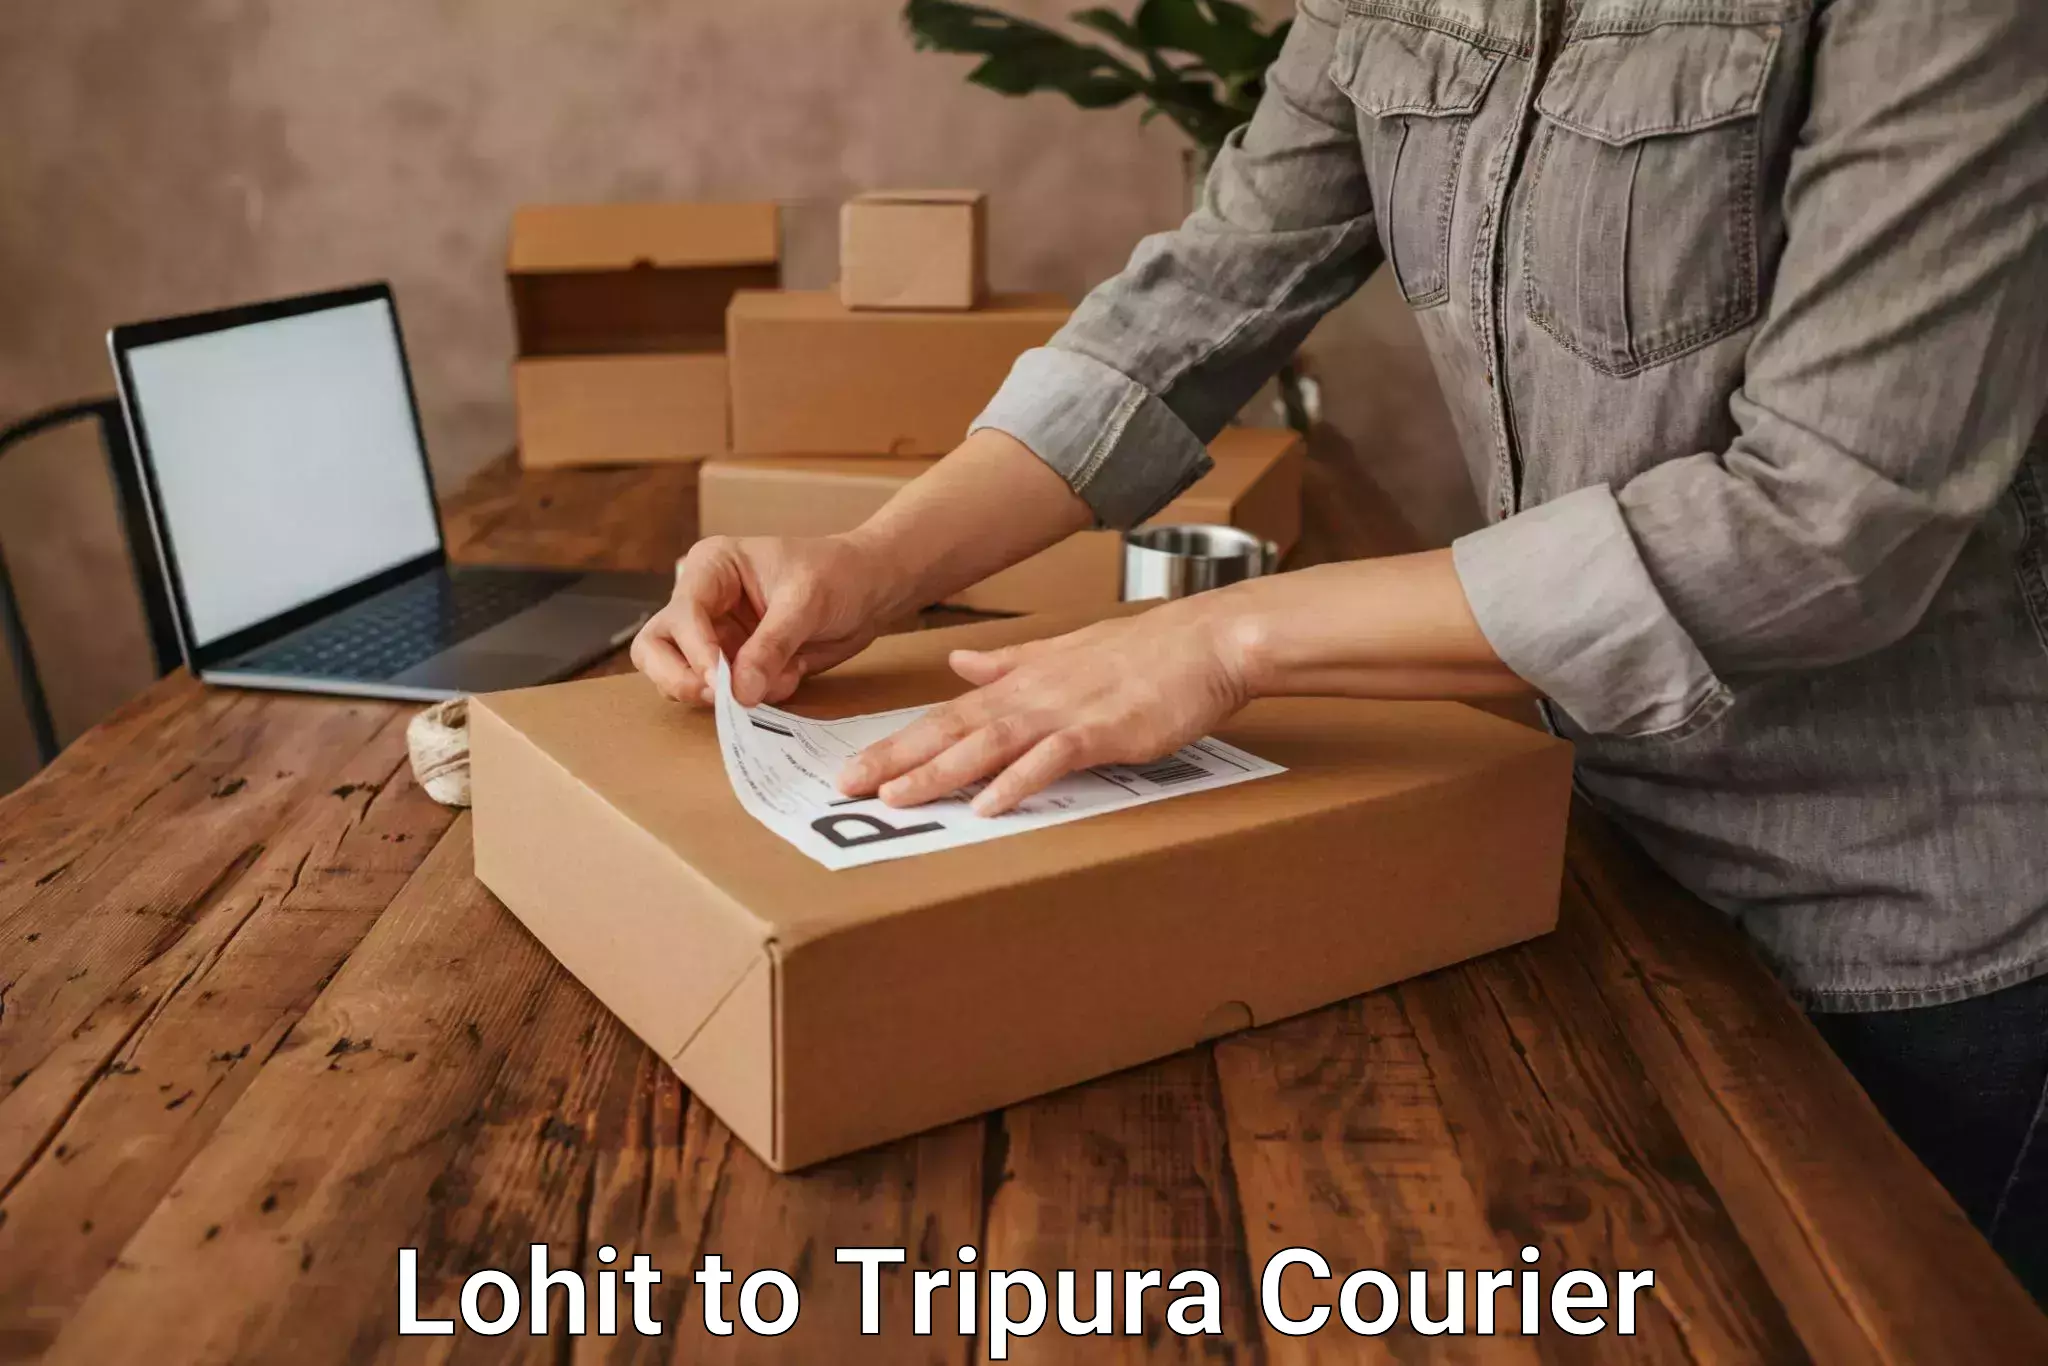 Speedy delivery service Lohit to Udaipur Tripura